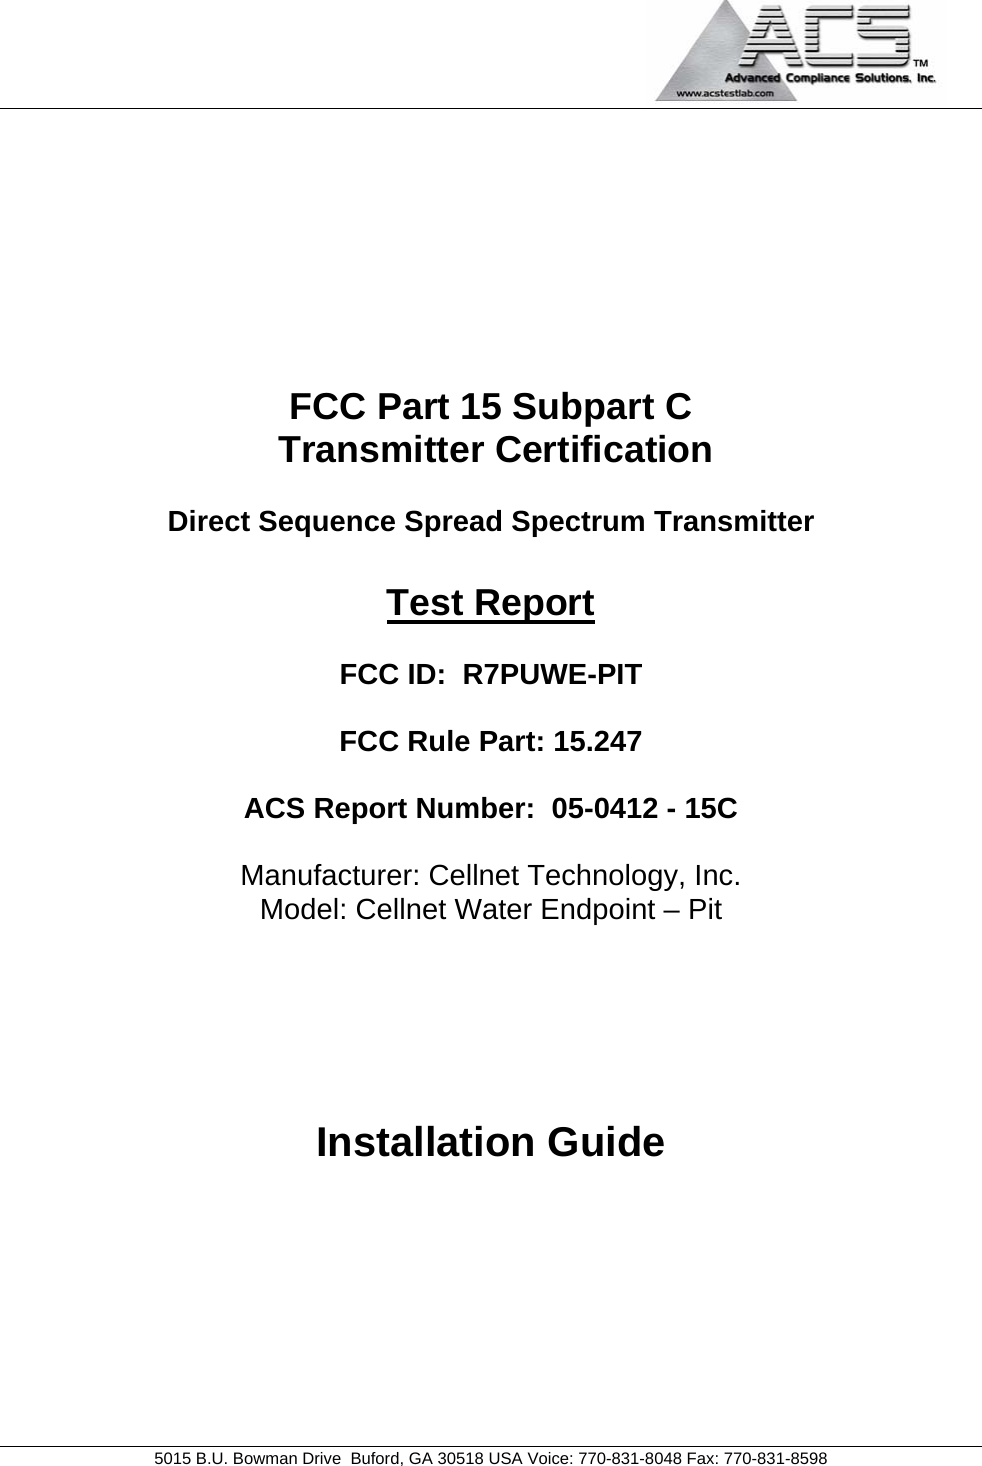                                             5015 B.U. Bowman Drive  Buford, GA 30518 USA Voice: 770-831-8048 Fax: 770-831-8598   FCC Part 15 Subpart C  Transmitter Certification  Direct Sequence Spread Spectrum Transmitter  Test Report  FCC ID:  R7PUWE-PIT  FCC Rule Part: 15.247  ACS Report Number:  05-0412 - 15C   Manufacturer: Cellnet Technology, Inc. Model: Cellnet Water Endpoint – Pit     Installation Guide 